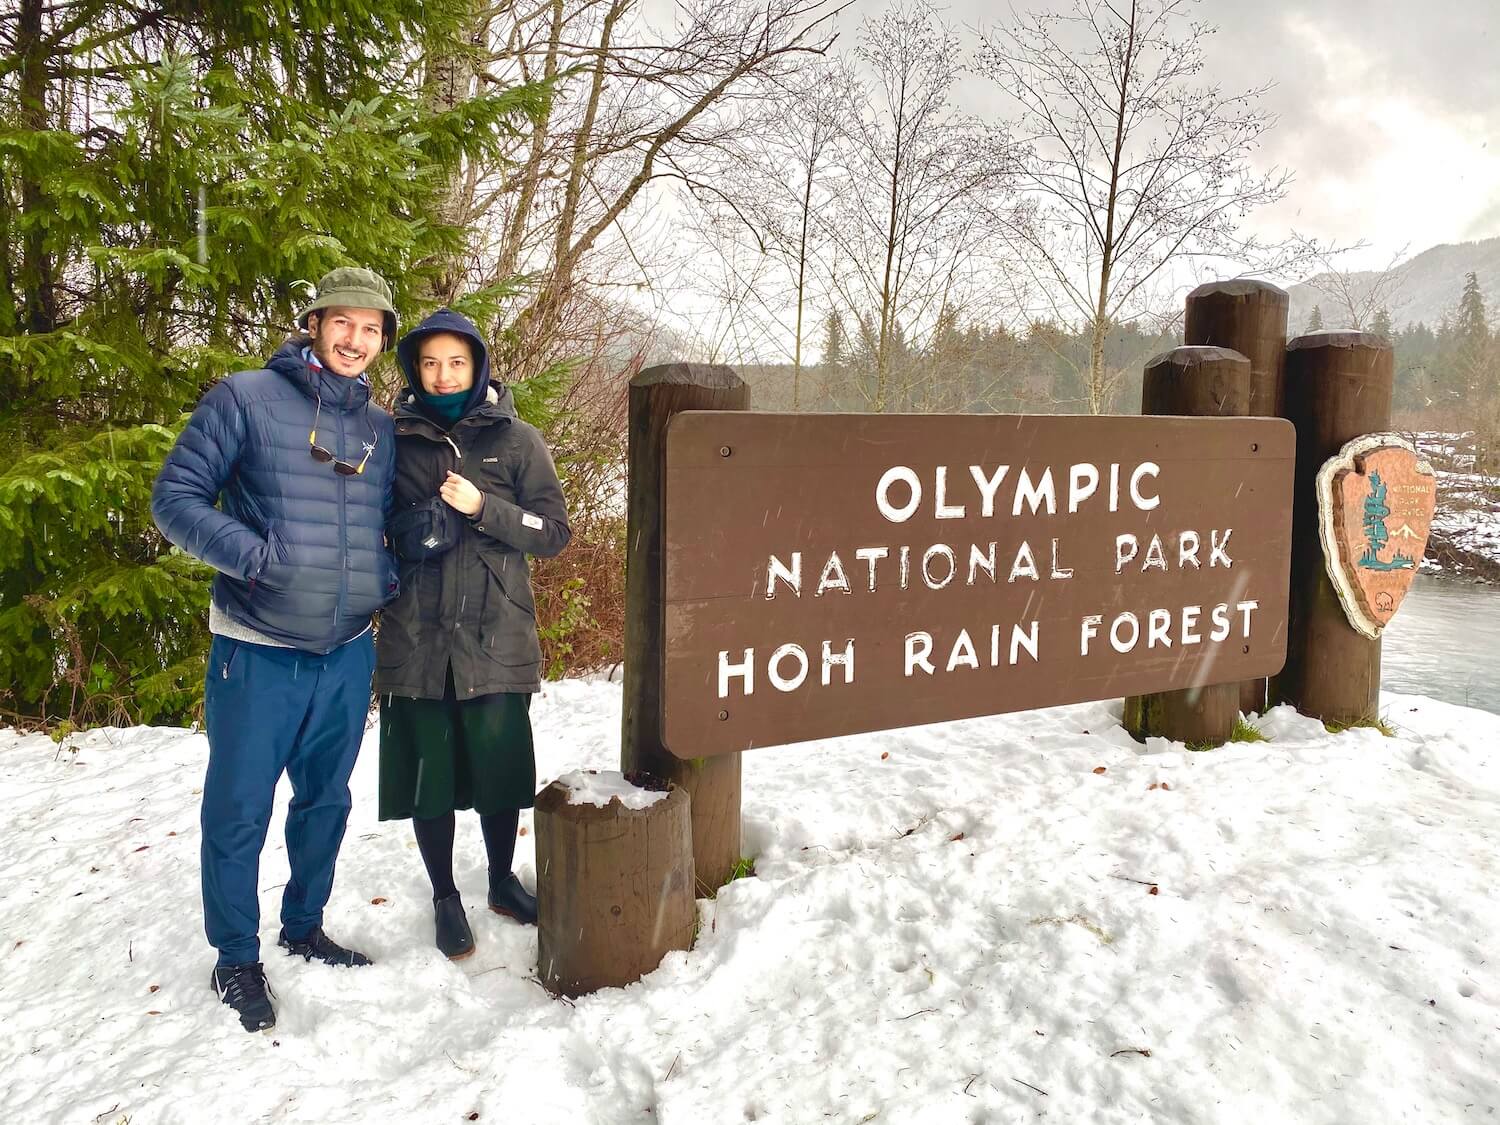 My friends stand at the entrance to the Olympic National Park. There are green fir trees in the background and snow on the ground.